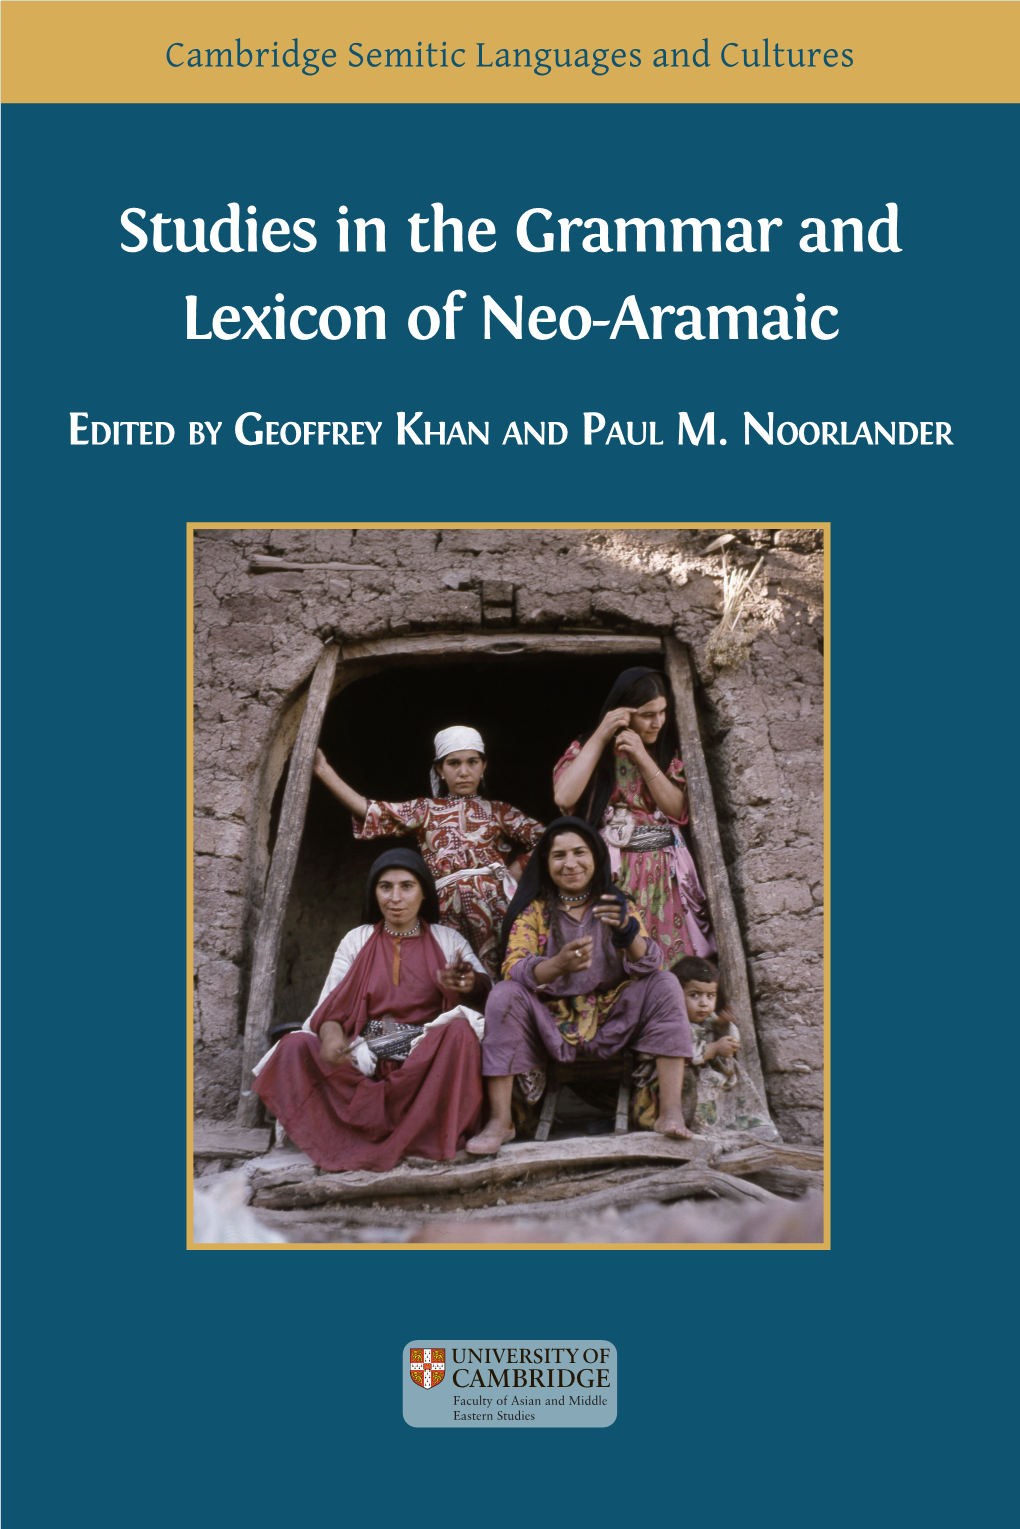 Towards a Typology of Possessors and Experiencers in Neo-Aramaic: Non-Canonical Subjects As Relics of a Former Dative Case